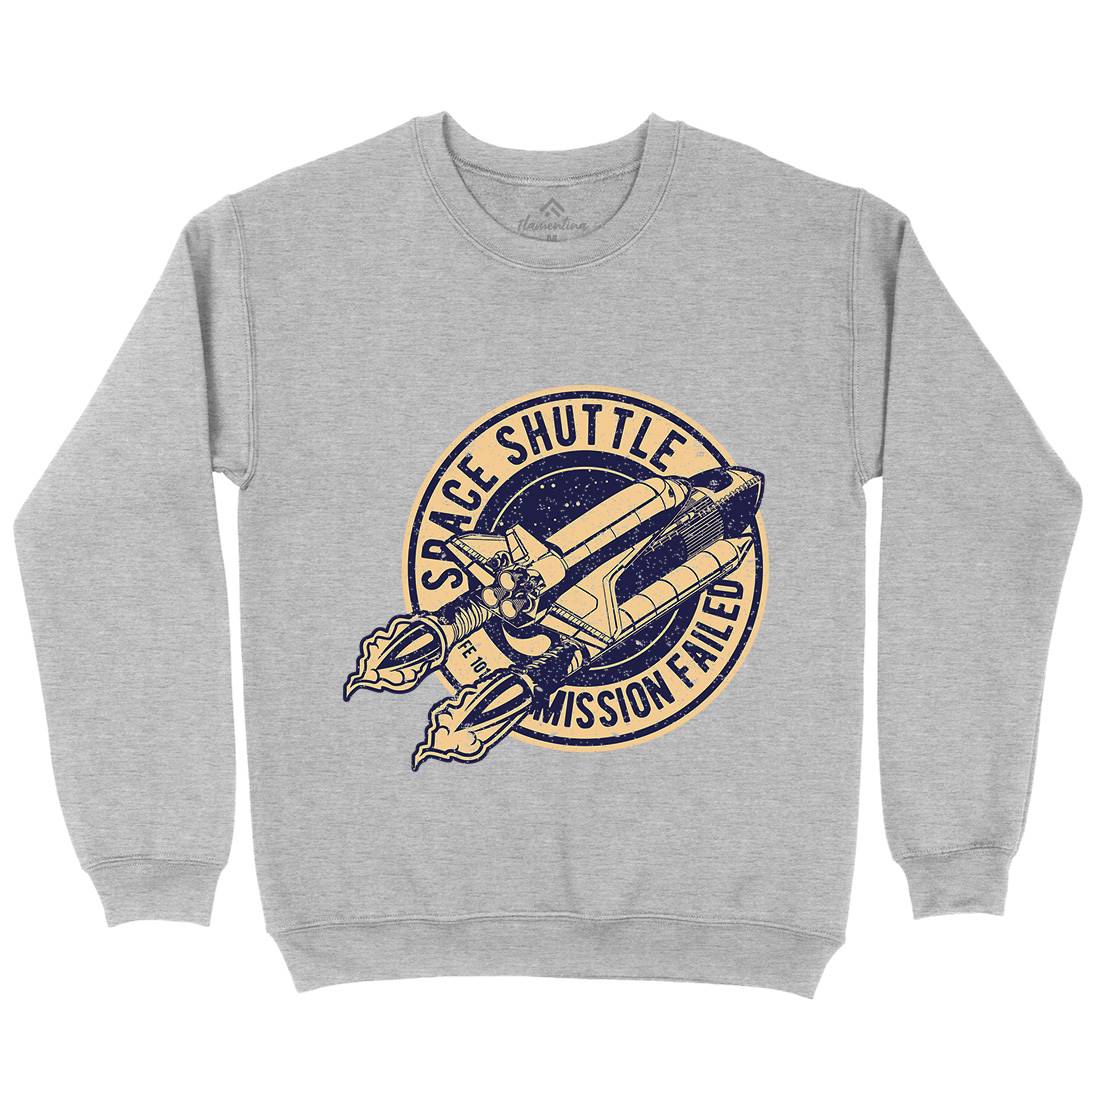 Mission Failed Mens Crew Neck Sweatshirt Space A713